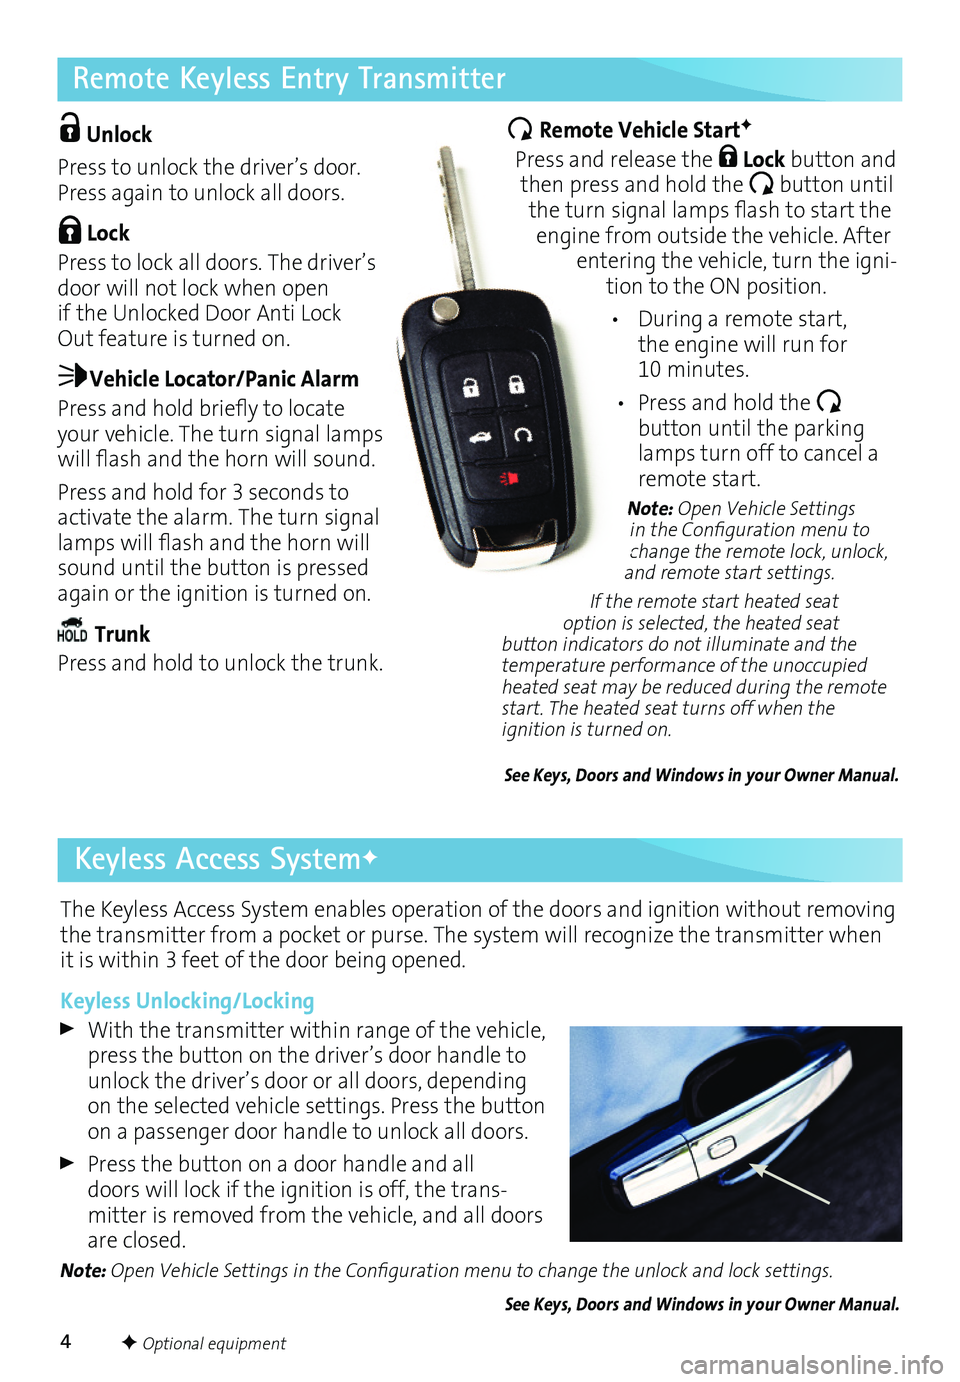 BUICK VERANO 2016  Get To Know Guide 4
Remote Keyless Entry Transmitter
The Keyless Access System enables operation of the doors and ignition without removing the transmitter from a pocket or purse. The system will recognize the transmit